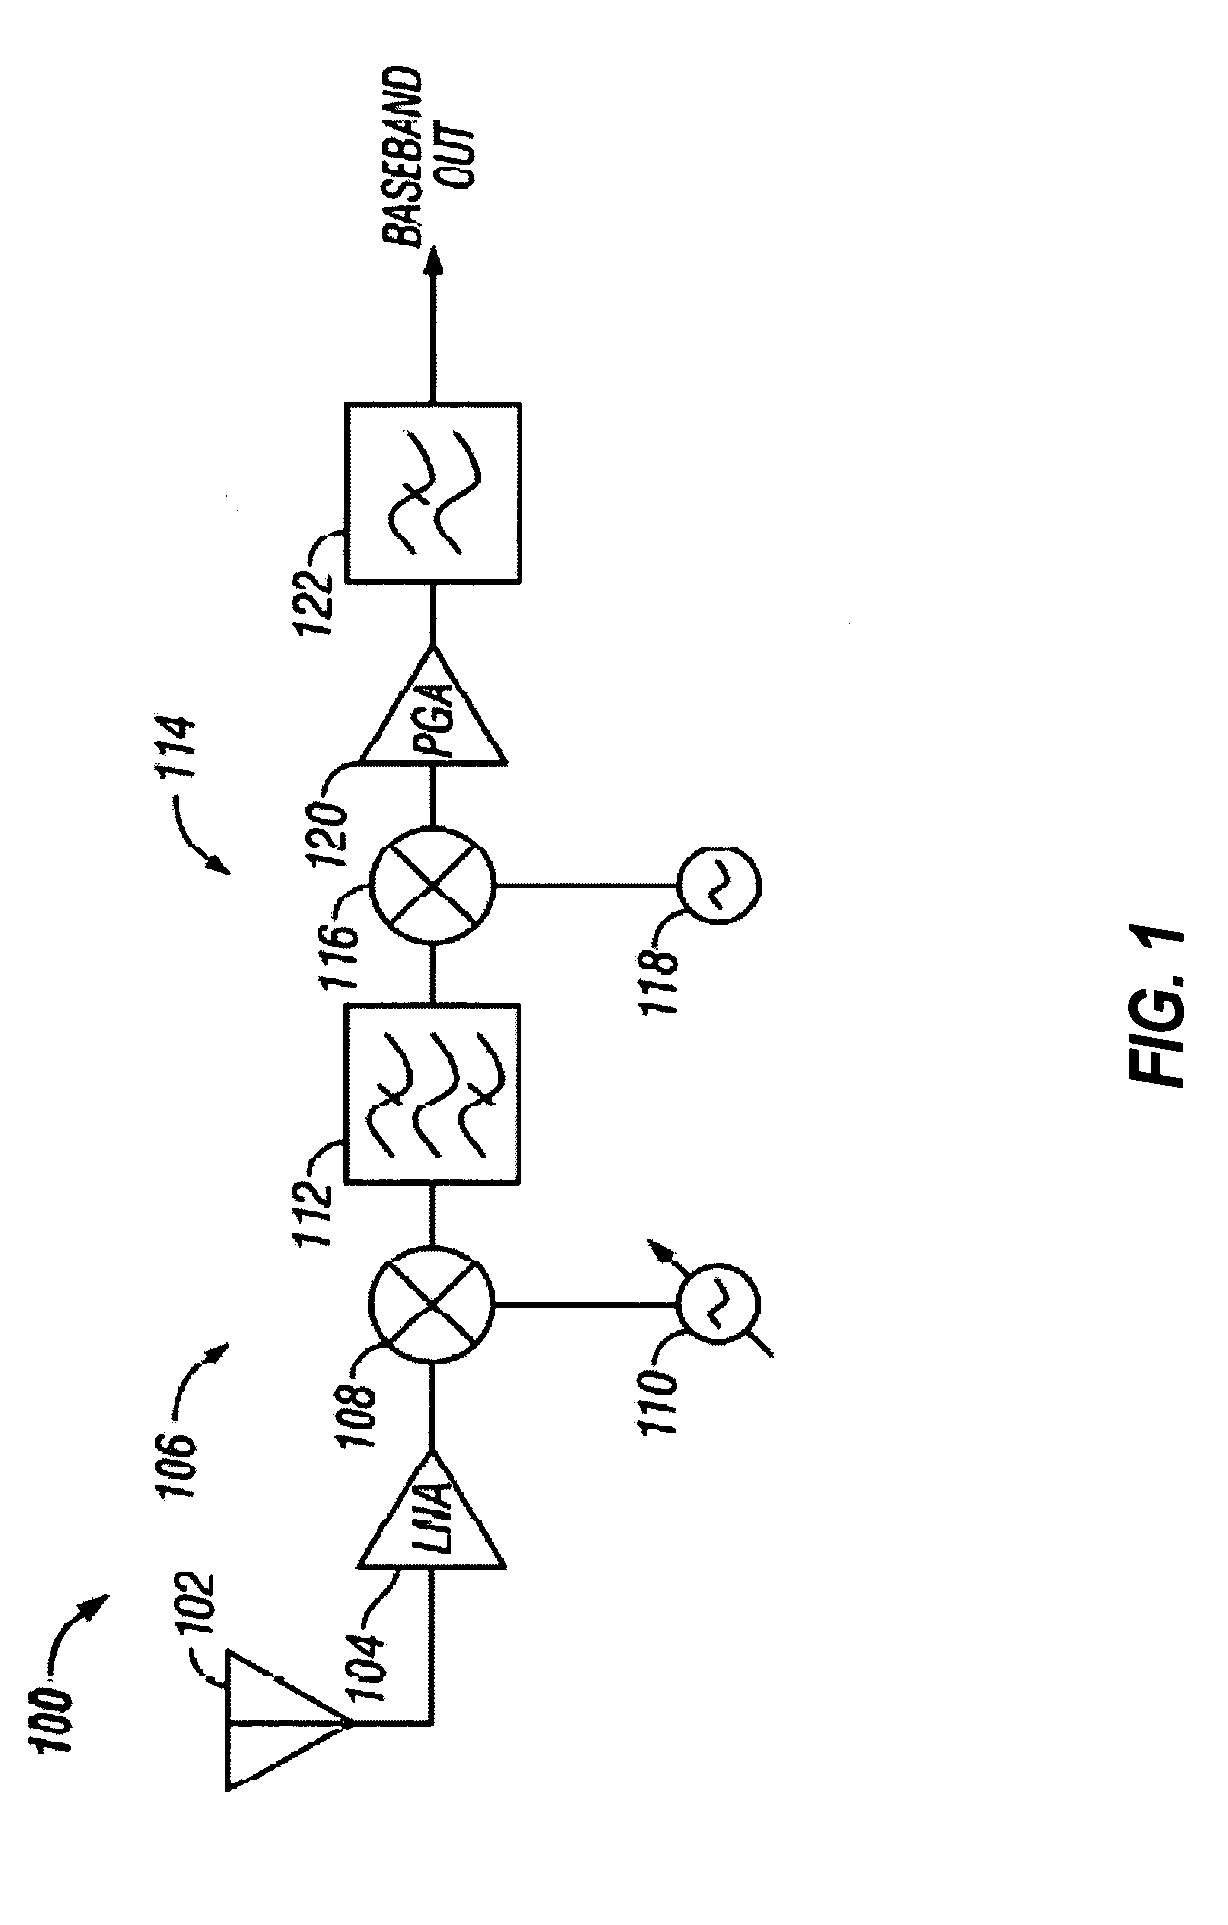 Low distortion quadrature mixer and method therefor